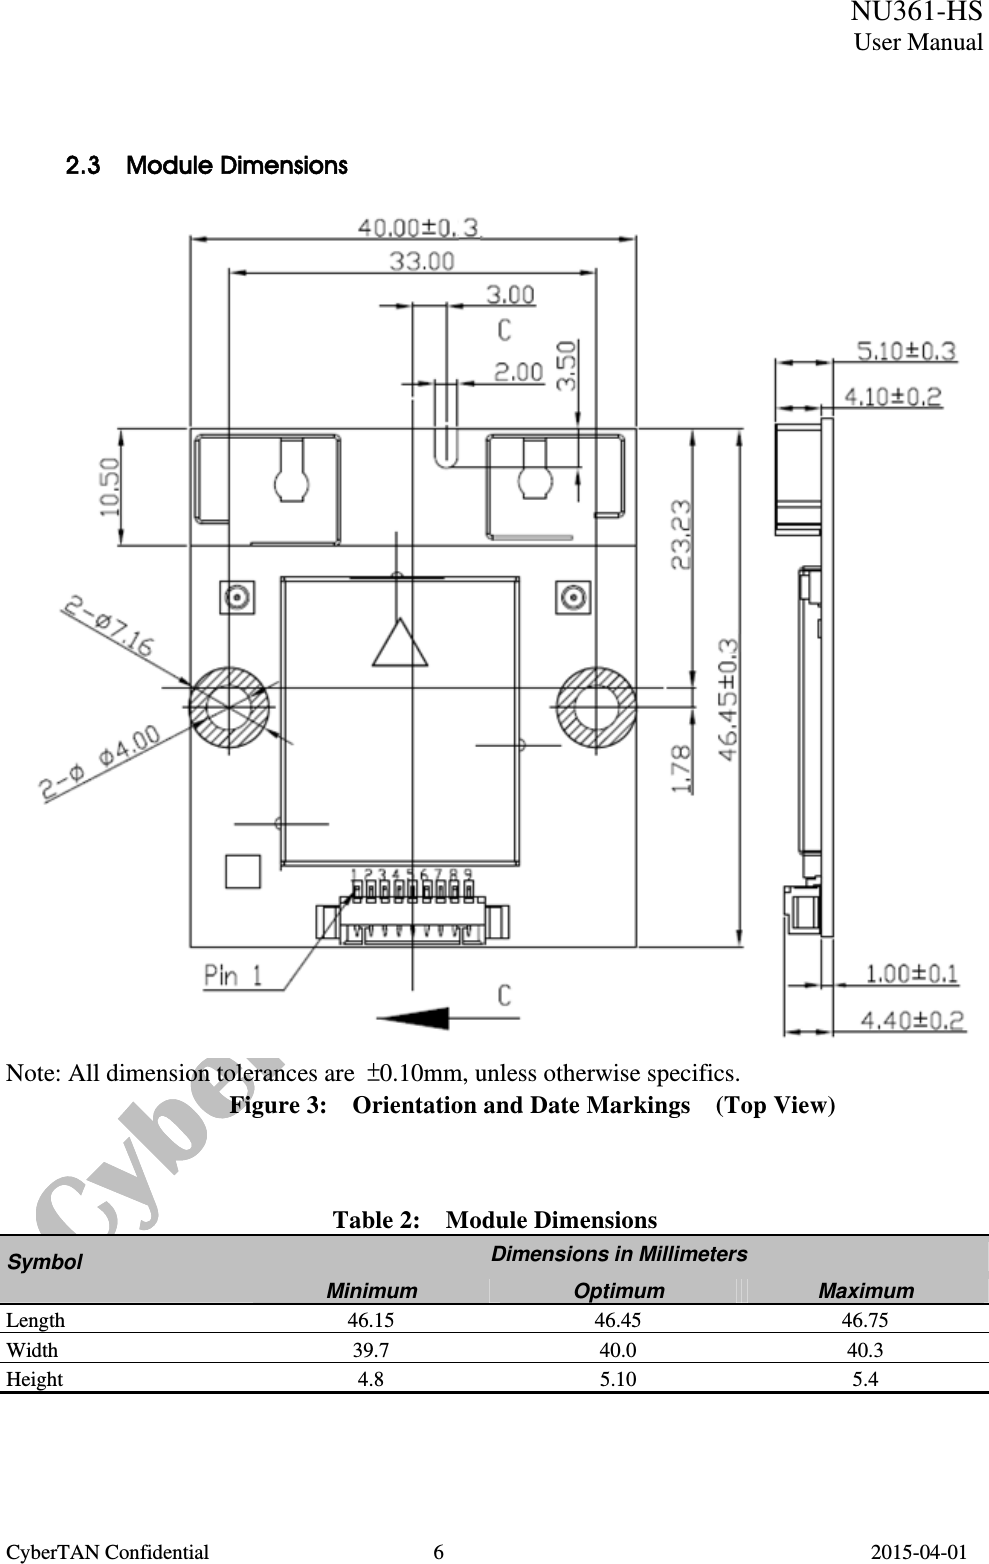  NU361-HS User Manual CyberTAN Confidential  6                                         2015-04-01   2.3  Module Dimensions  Note: All dimension tolerances are  ±0.10mm, unless otherwise specifics. Figure 3:    Orientation and Date Markings    (Top View)    Table 2:  Module Dimensions Dimensions in Millimeters Symbol Minimum  Optimum  Maximum Length 46.15 46.45 46.75 Width 39.7 40.0 40.3 Height 4.8 5.10 5.4    